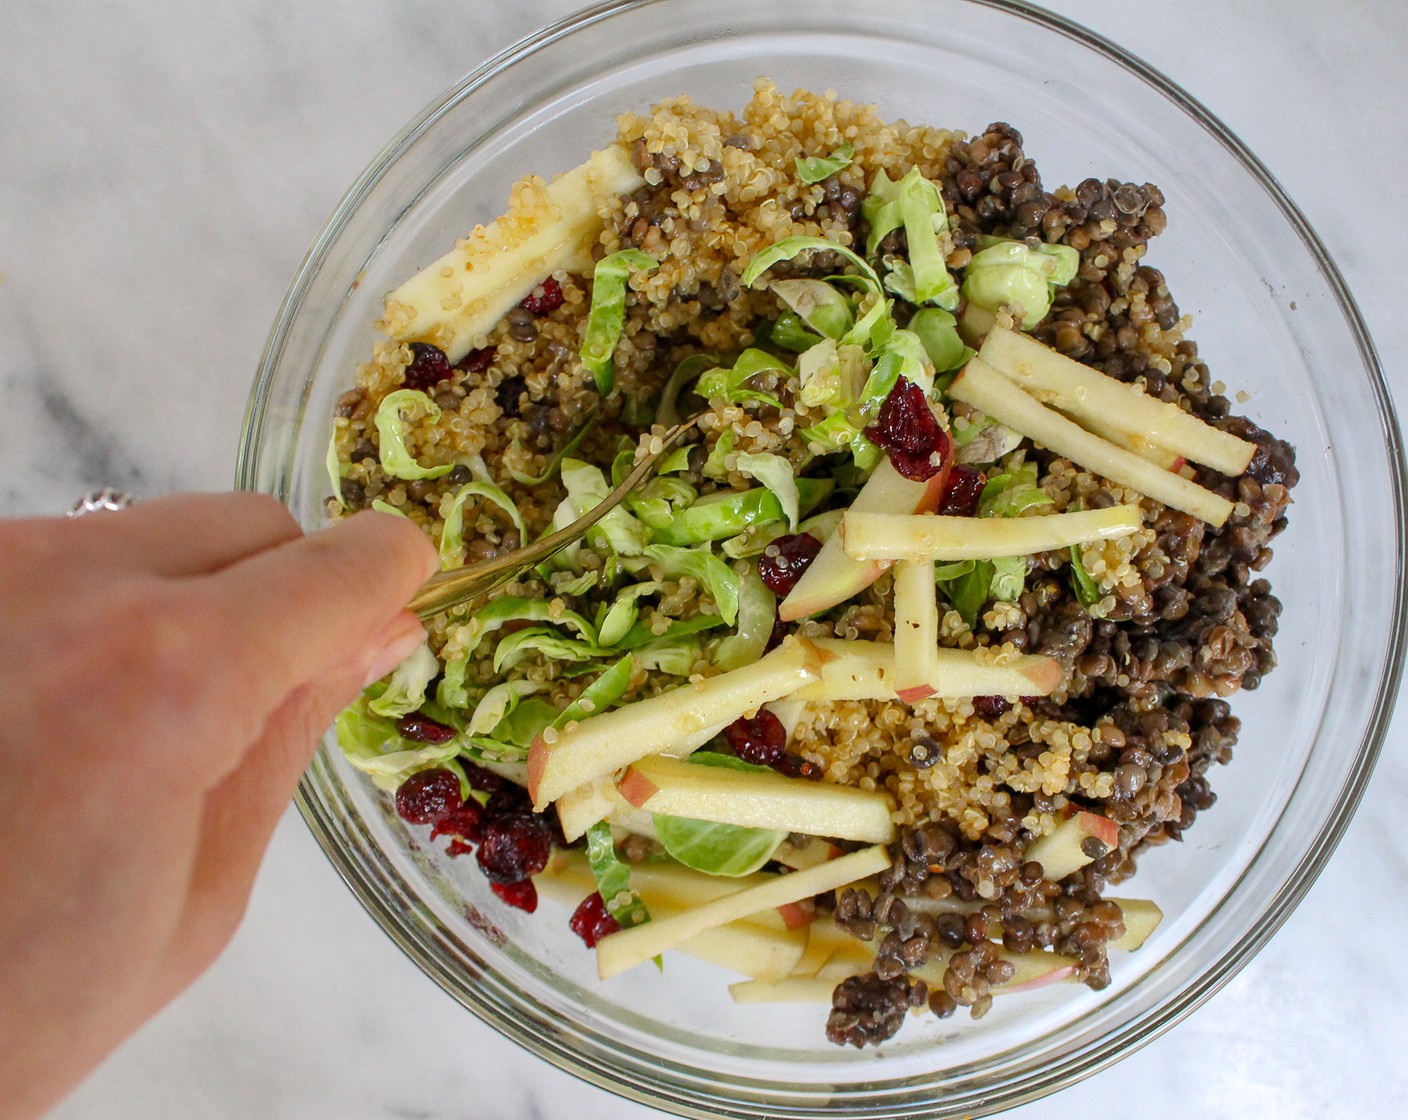 step 5 Once the lentils and quinoa finish cooking, add to the large bowl with brussels sprouts. Toss together with dressing and serve warm. Enjoy!